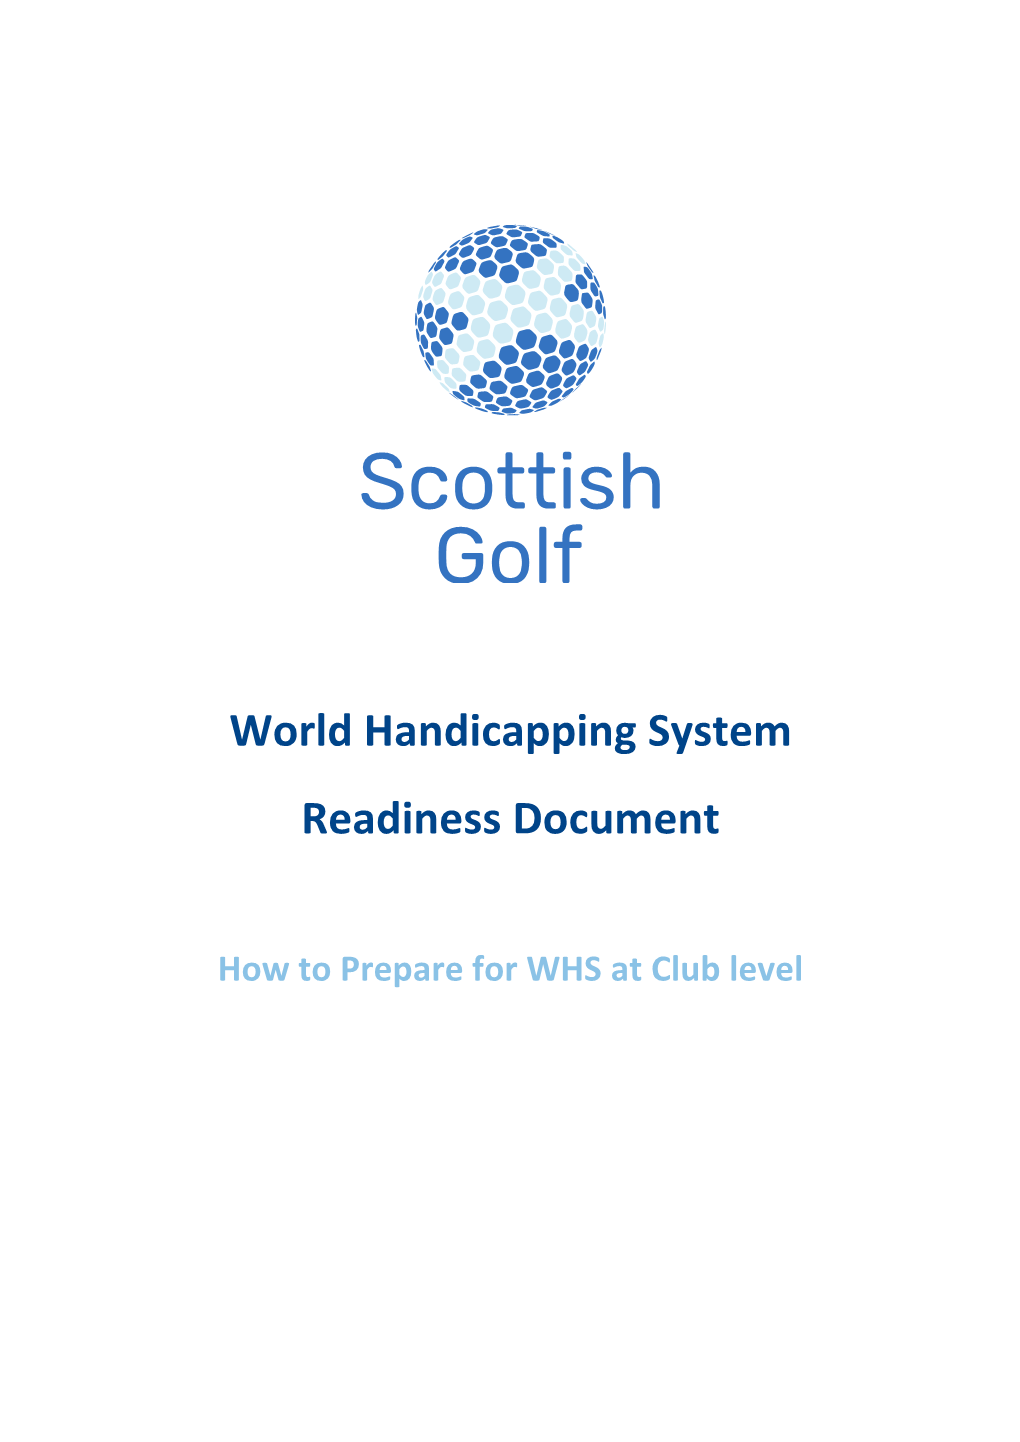 World Handicapping System Readiness Document